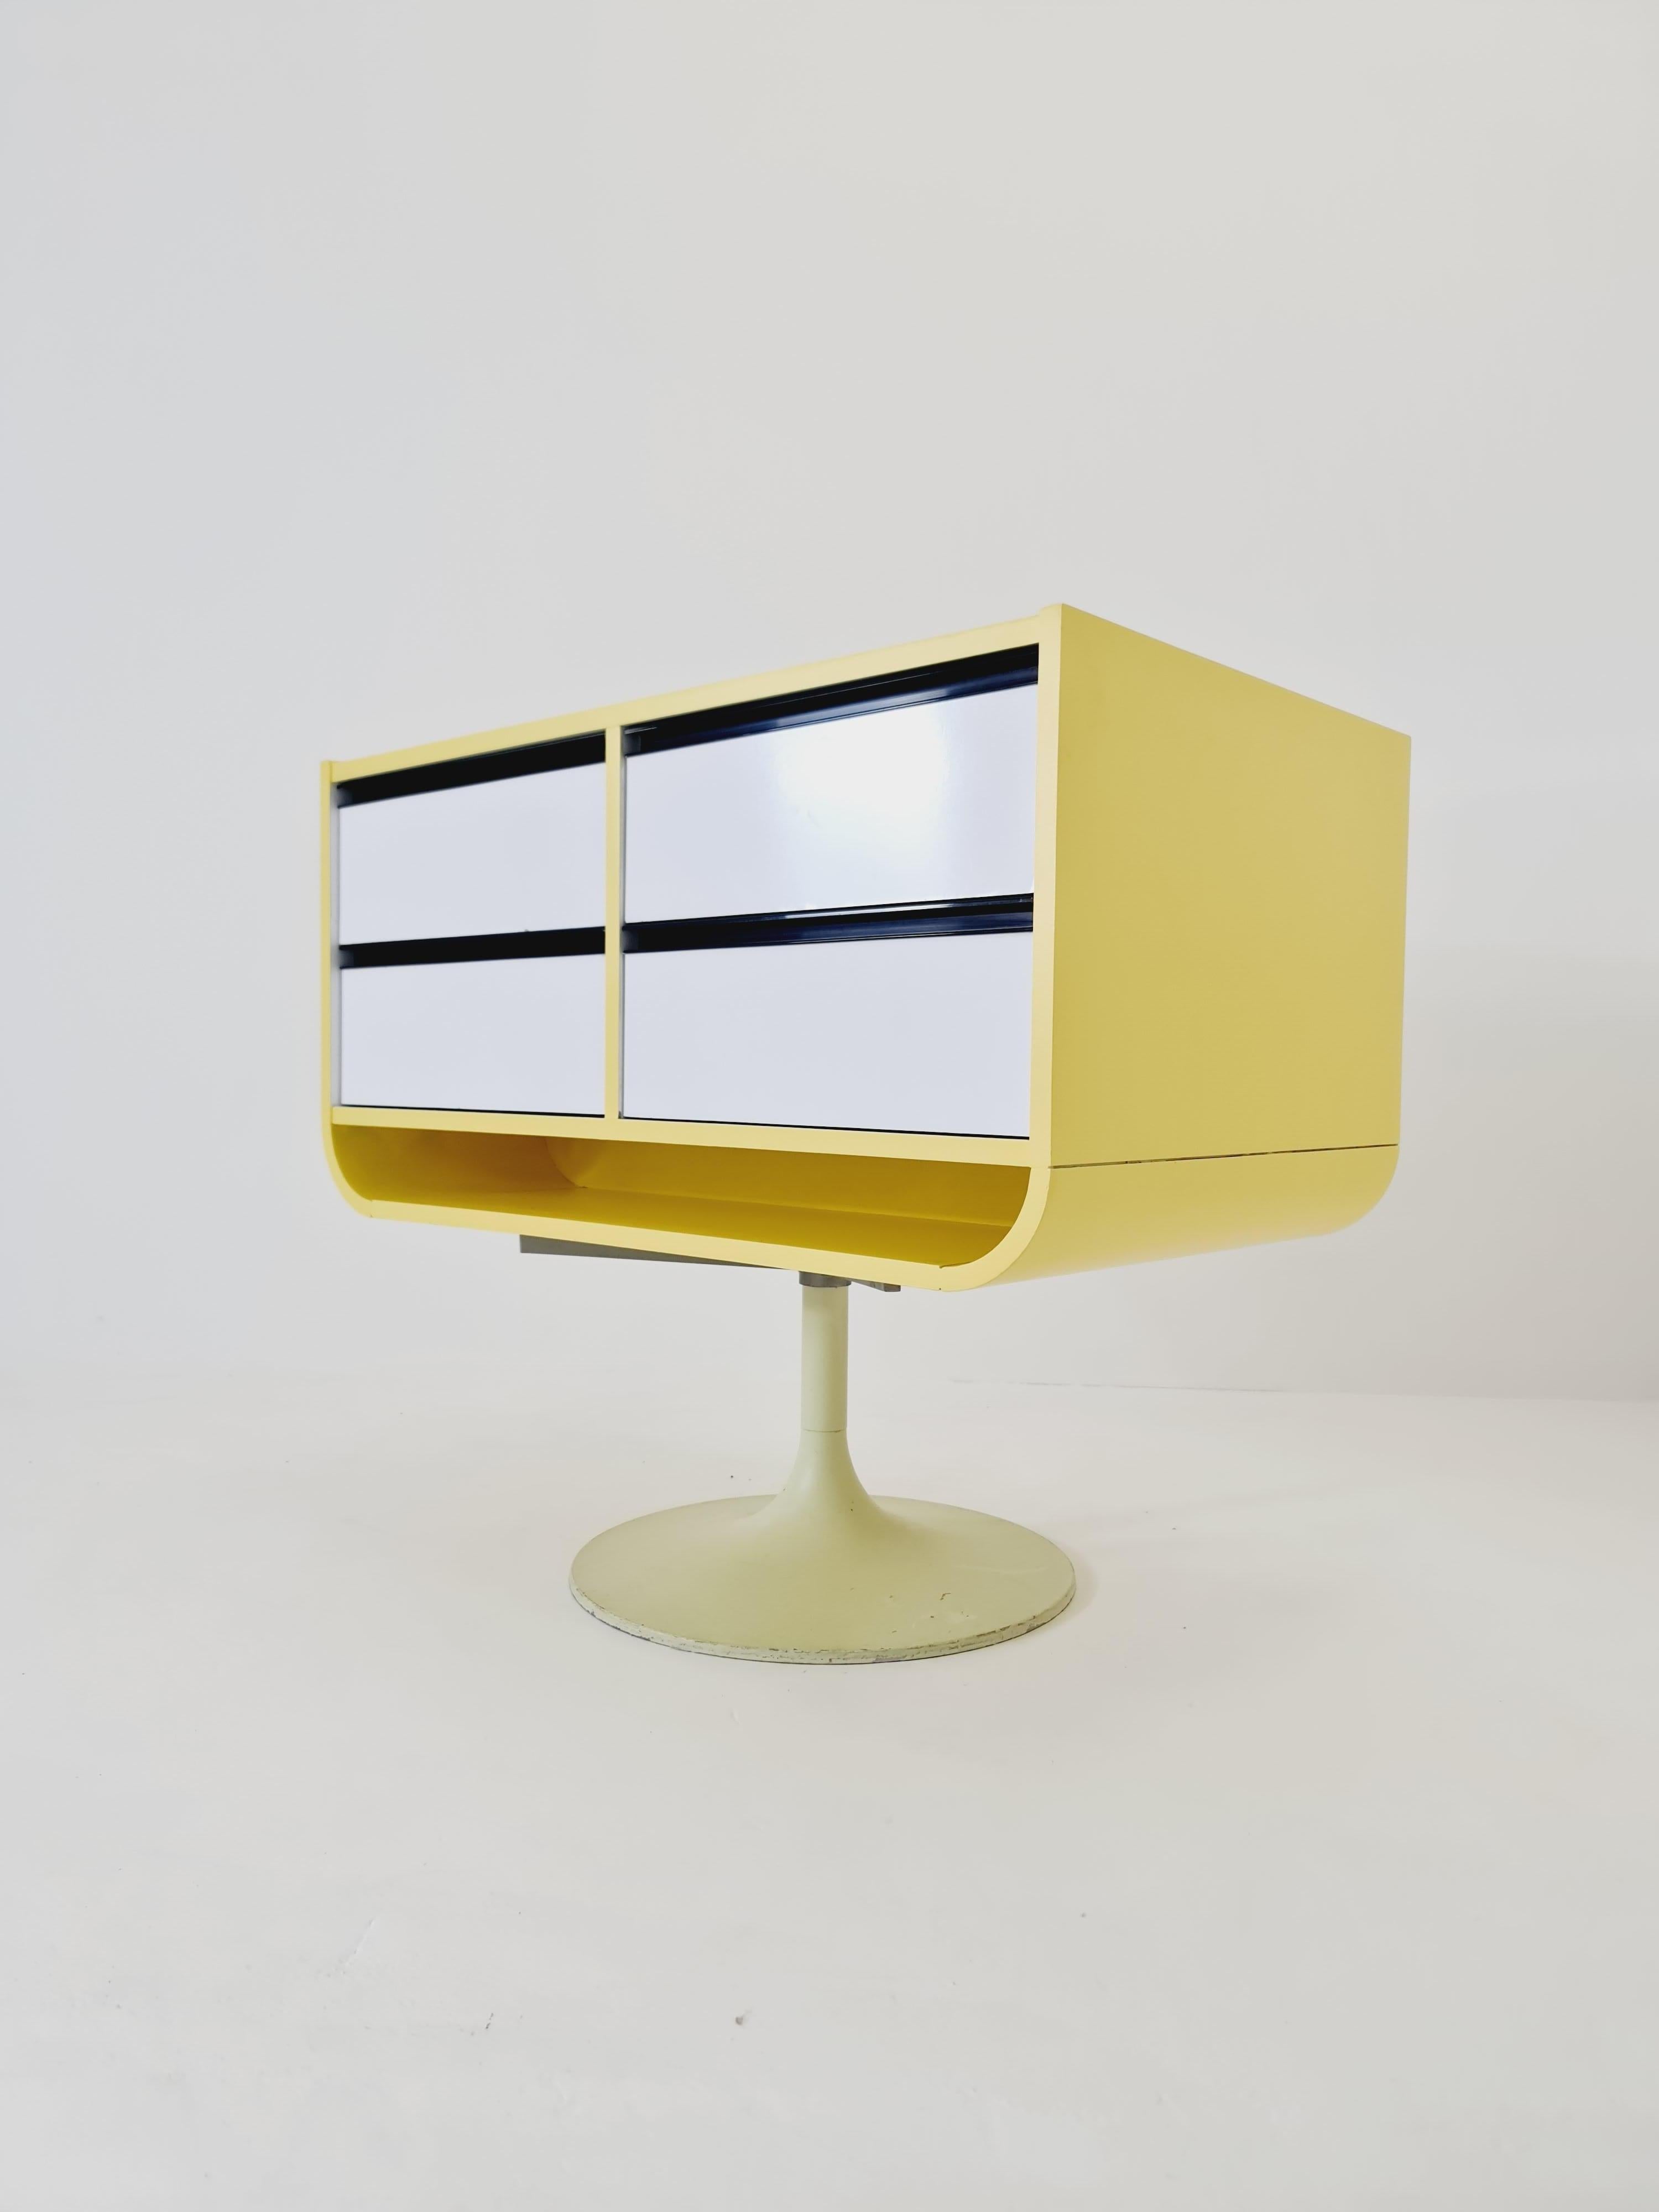 Set of Tow Space Age Midcentury Tulip Show Case Drawers with Glass Front, 1970s For Sale 1